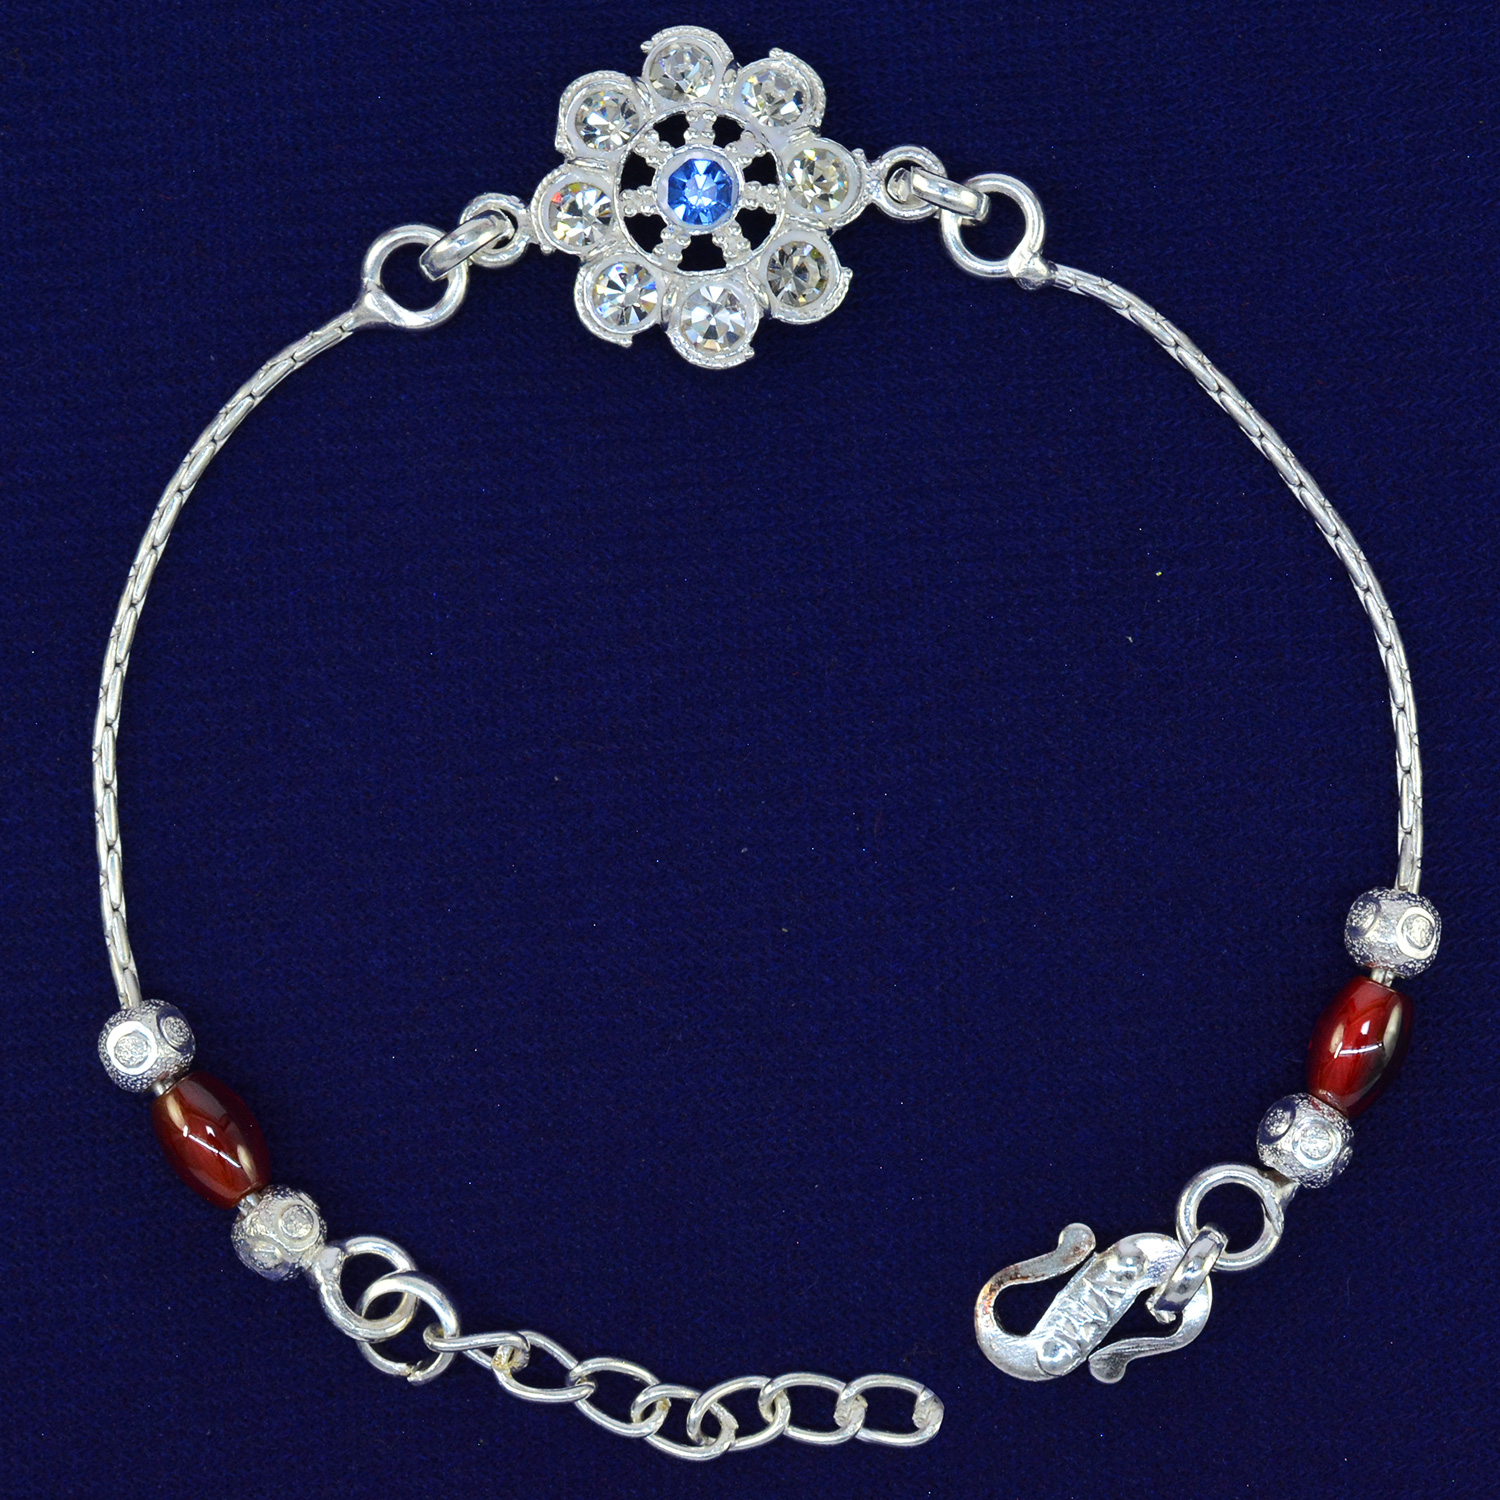 Blue Stone in Mid Beautiful Floral 70% Pure Silver Rakhi for Brother 7.4 Grams